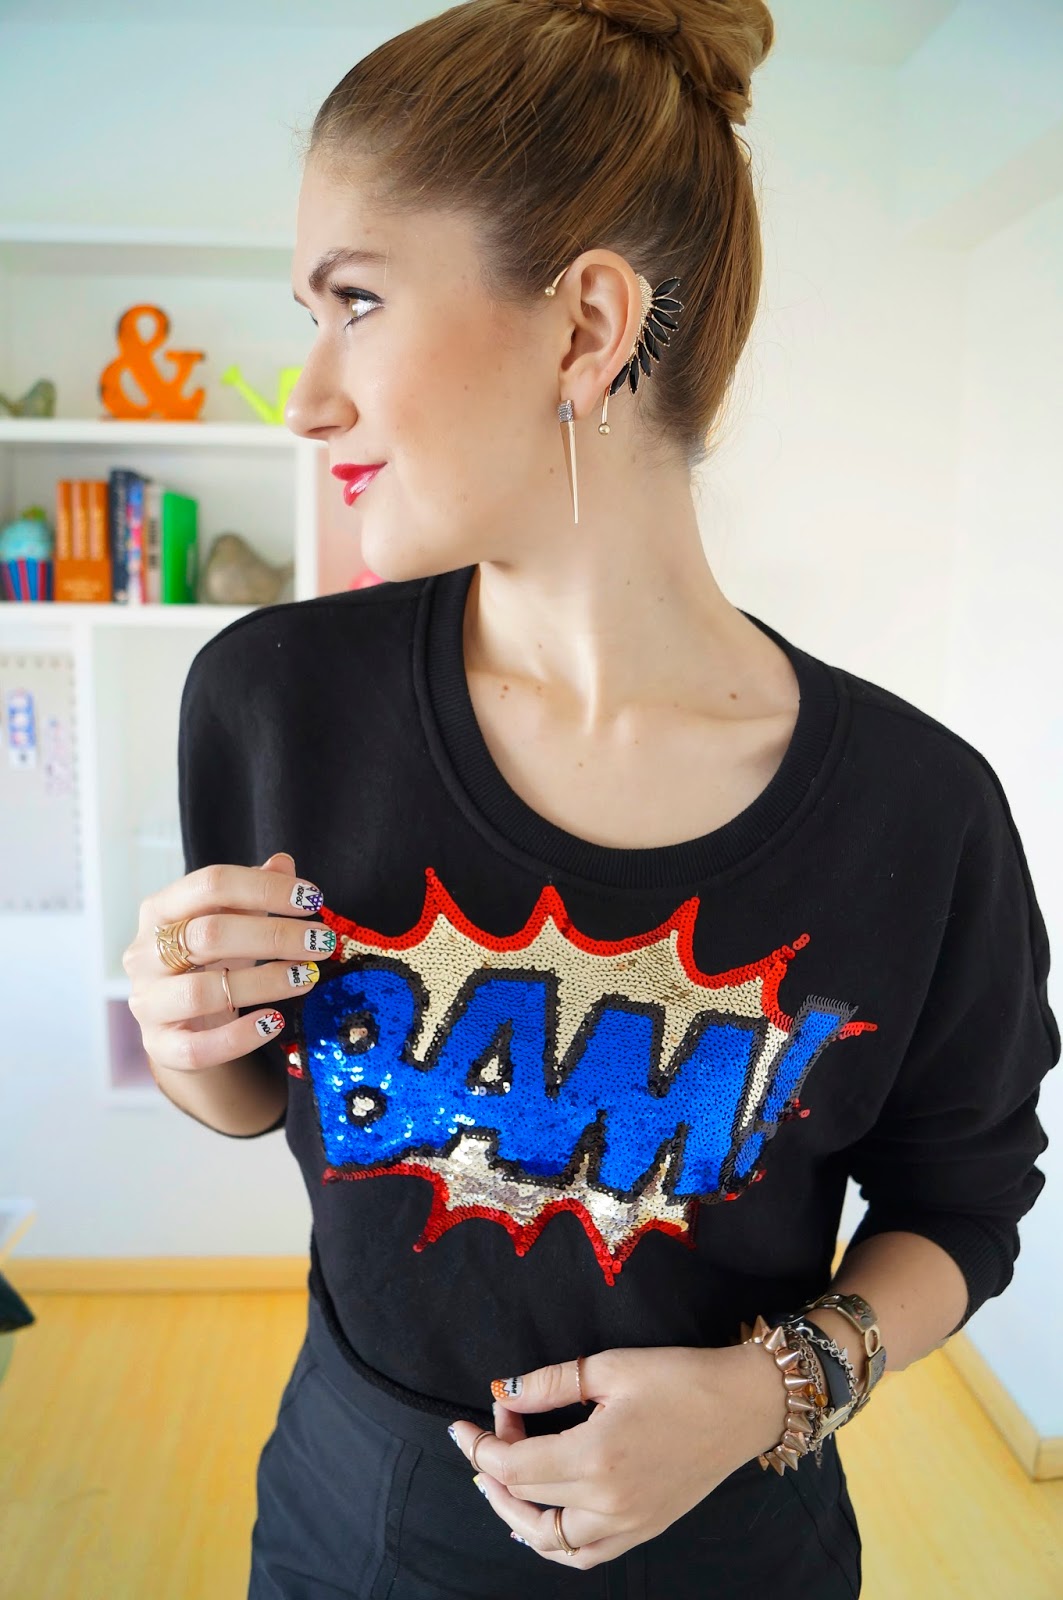 Pop Art Outfit, Pop Art Trend, Summer 2014 Trend, Fashion Blog, Trendy Outfit 2014, Forever 21 Sweater, Ear Cuff Outfit, Bun Hairstyle